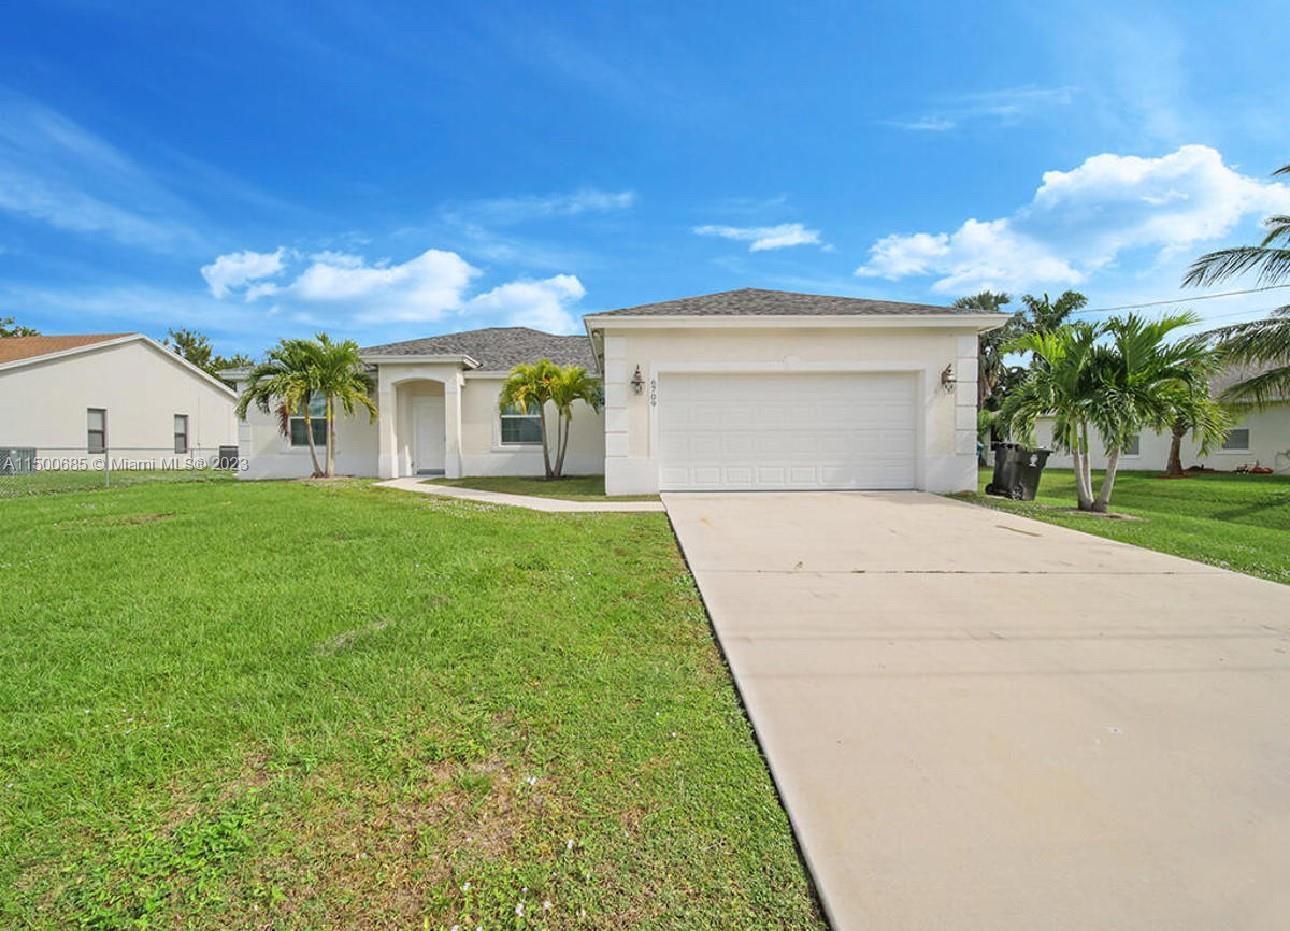 Photo of 6709 NW Dorothy St in Stlucie West, FL